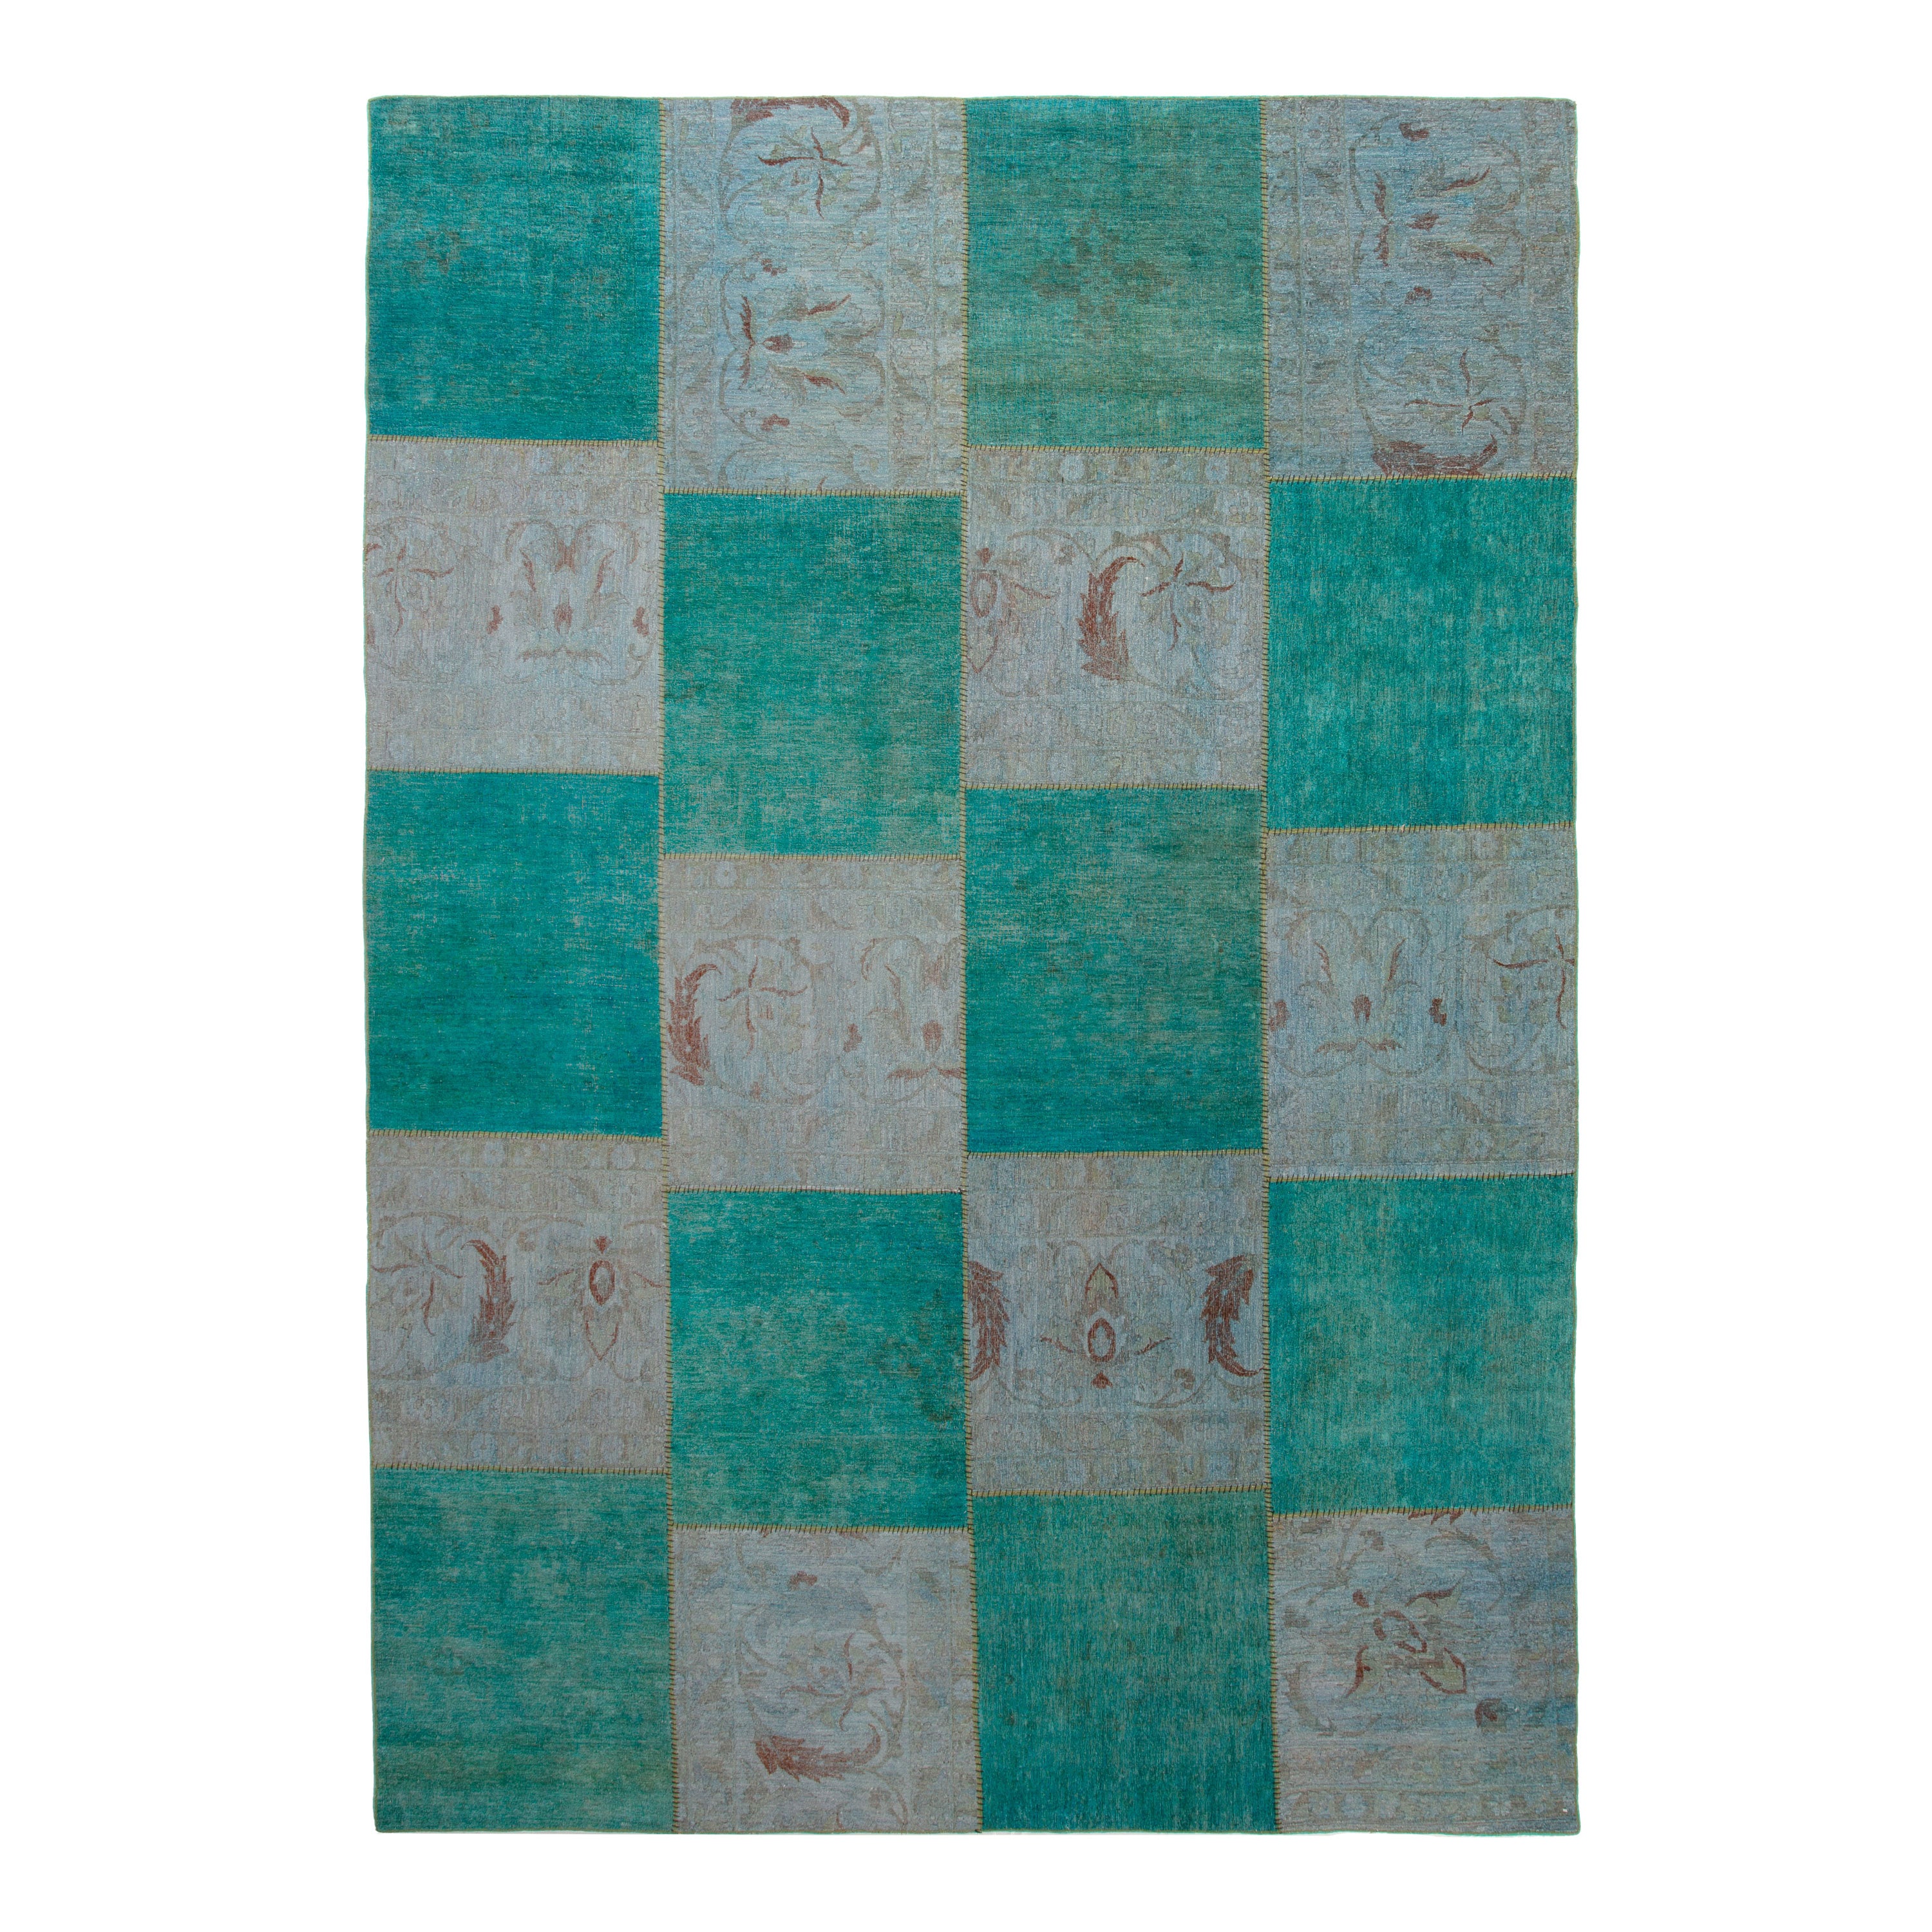 Green Overdyed Wool Rug - 9'11" x 14'4"